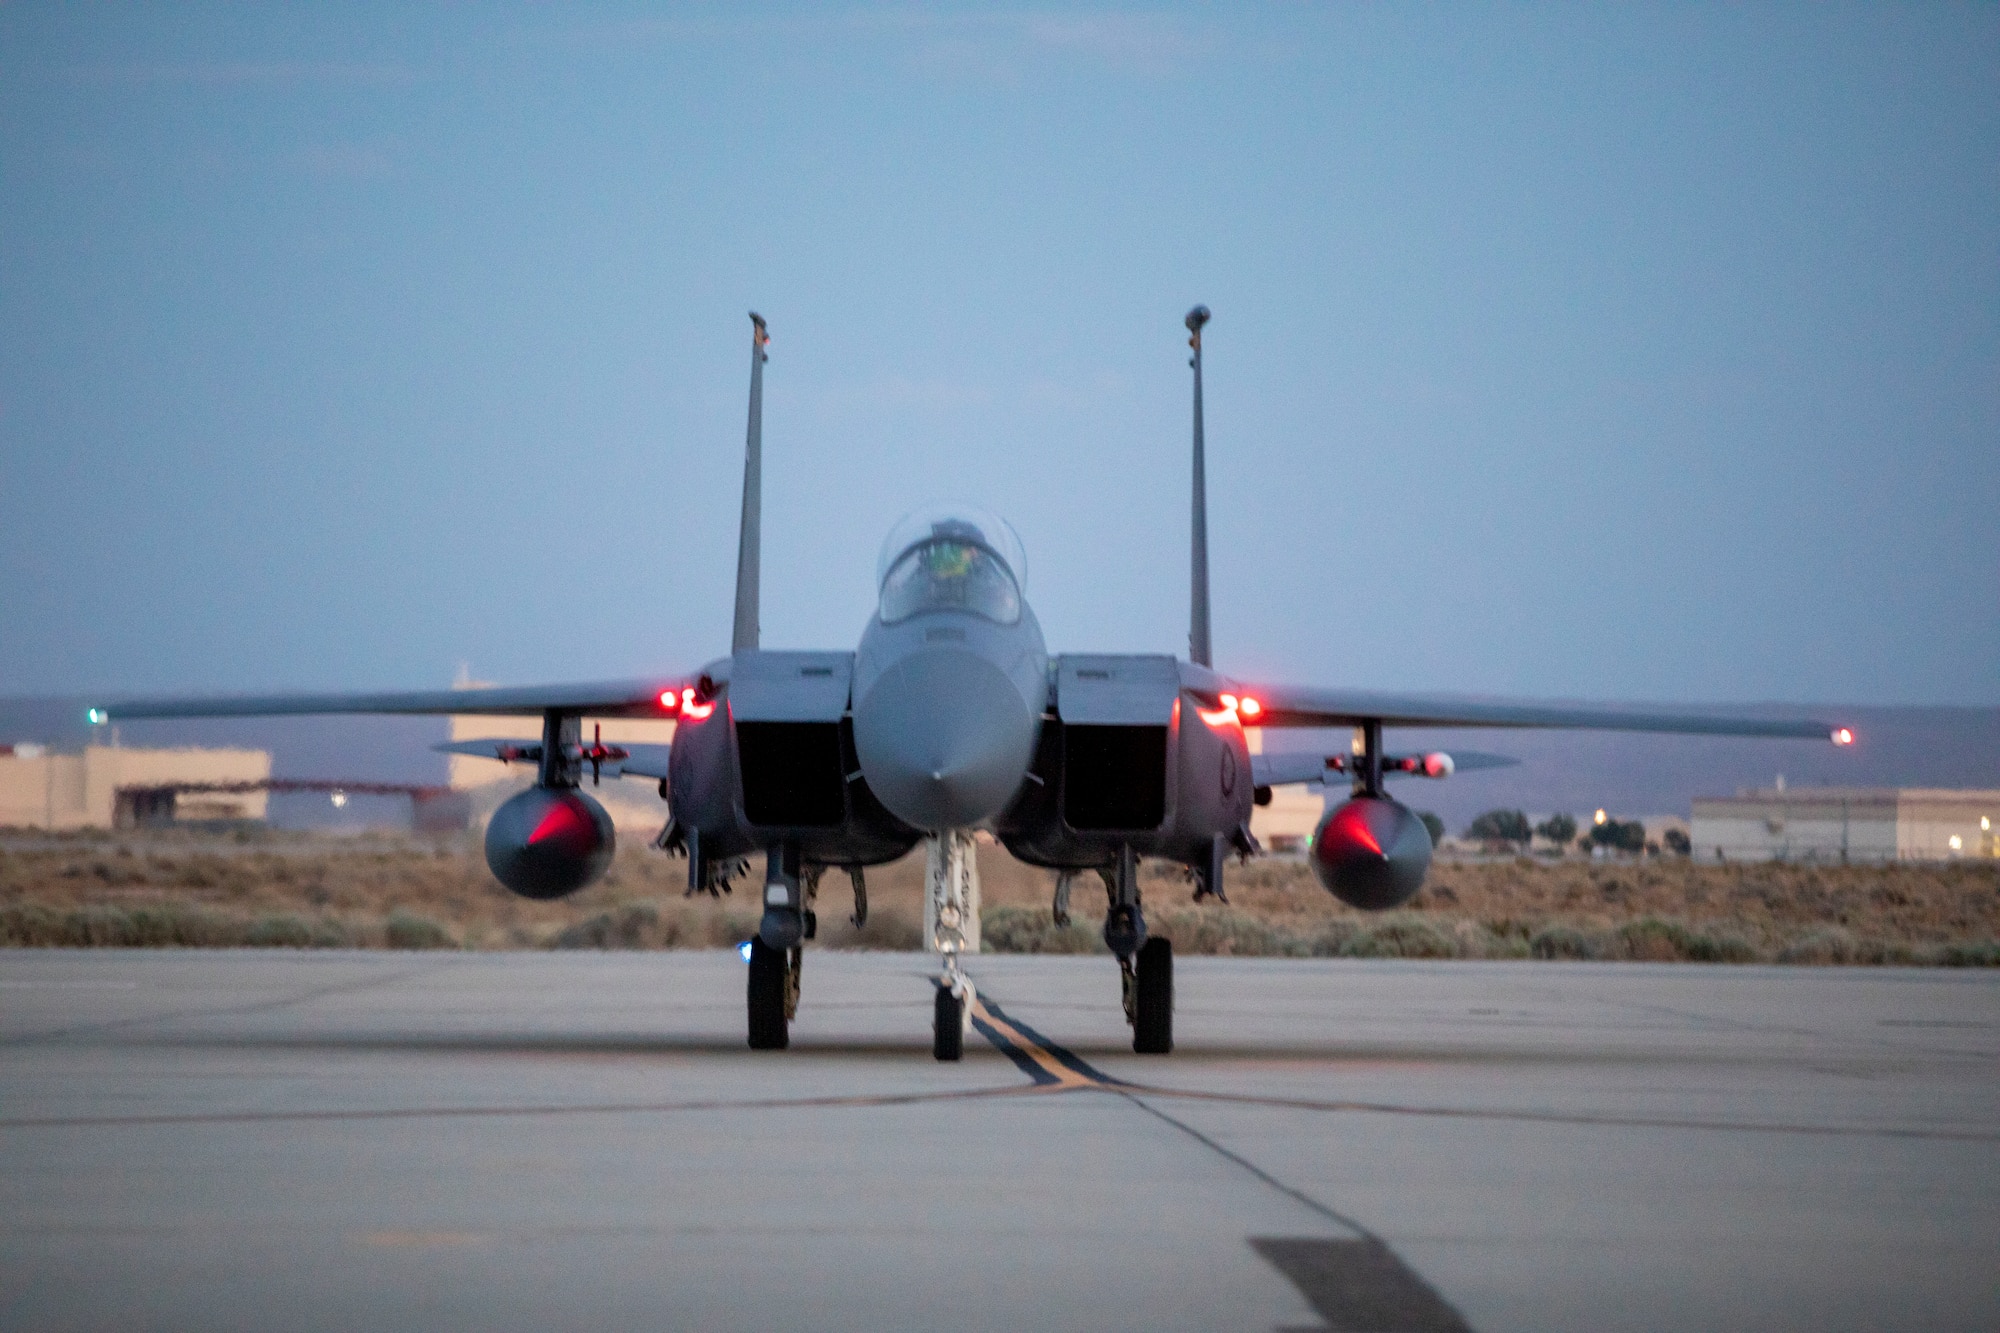 A F-15 assigned to the U.S. Air Force Weapons School parks on the flightline at Edwards Air Force Base, California. The Weapons School trains tactical experts and leaders to control and exploit air, space and cyber on behalf of the joint force.